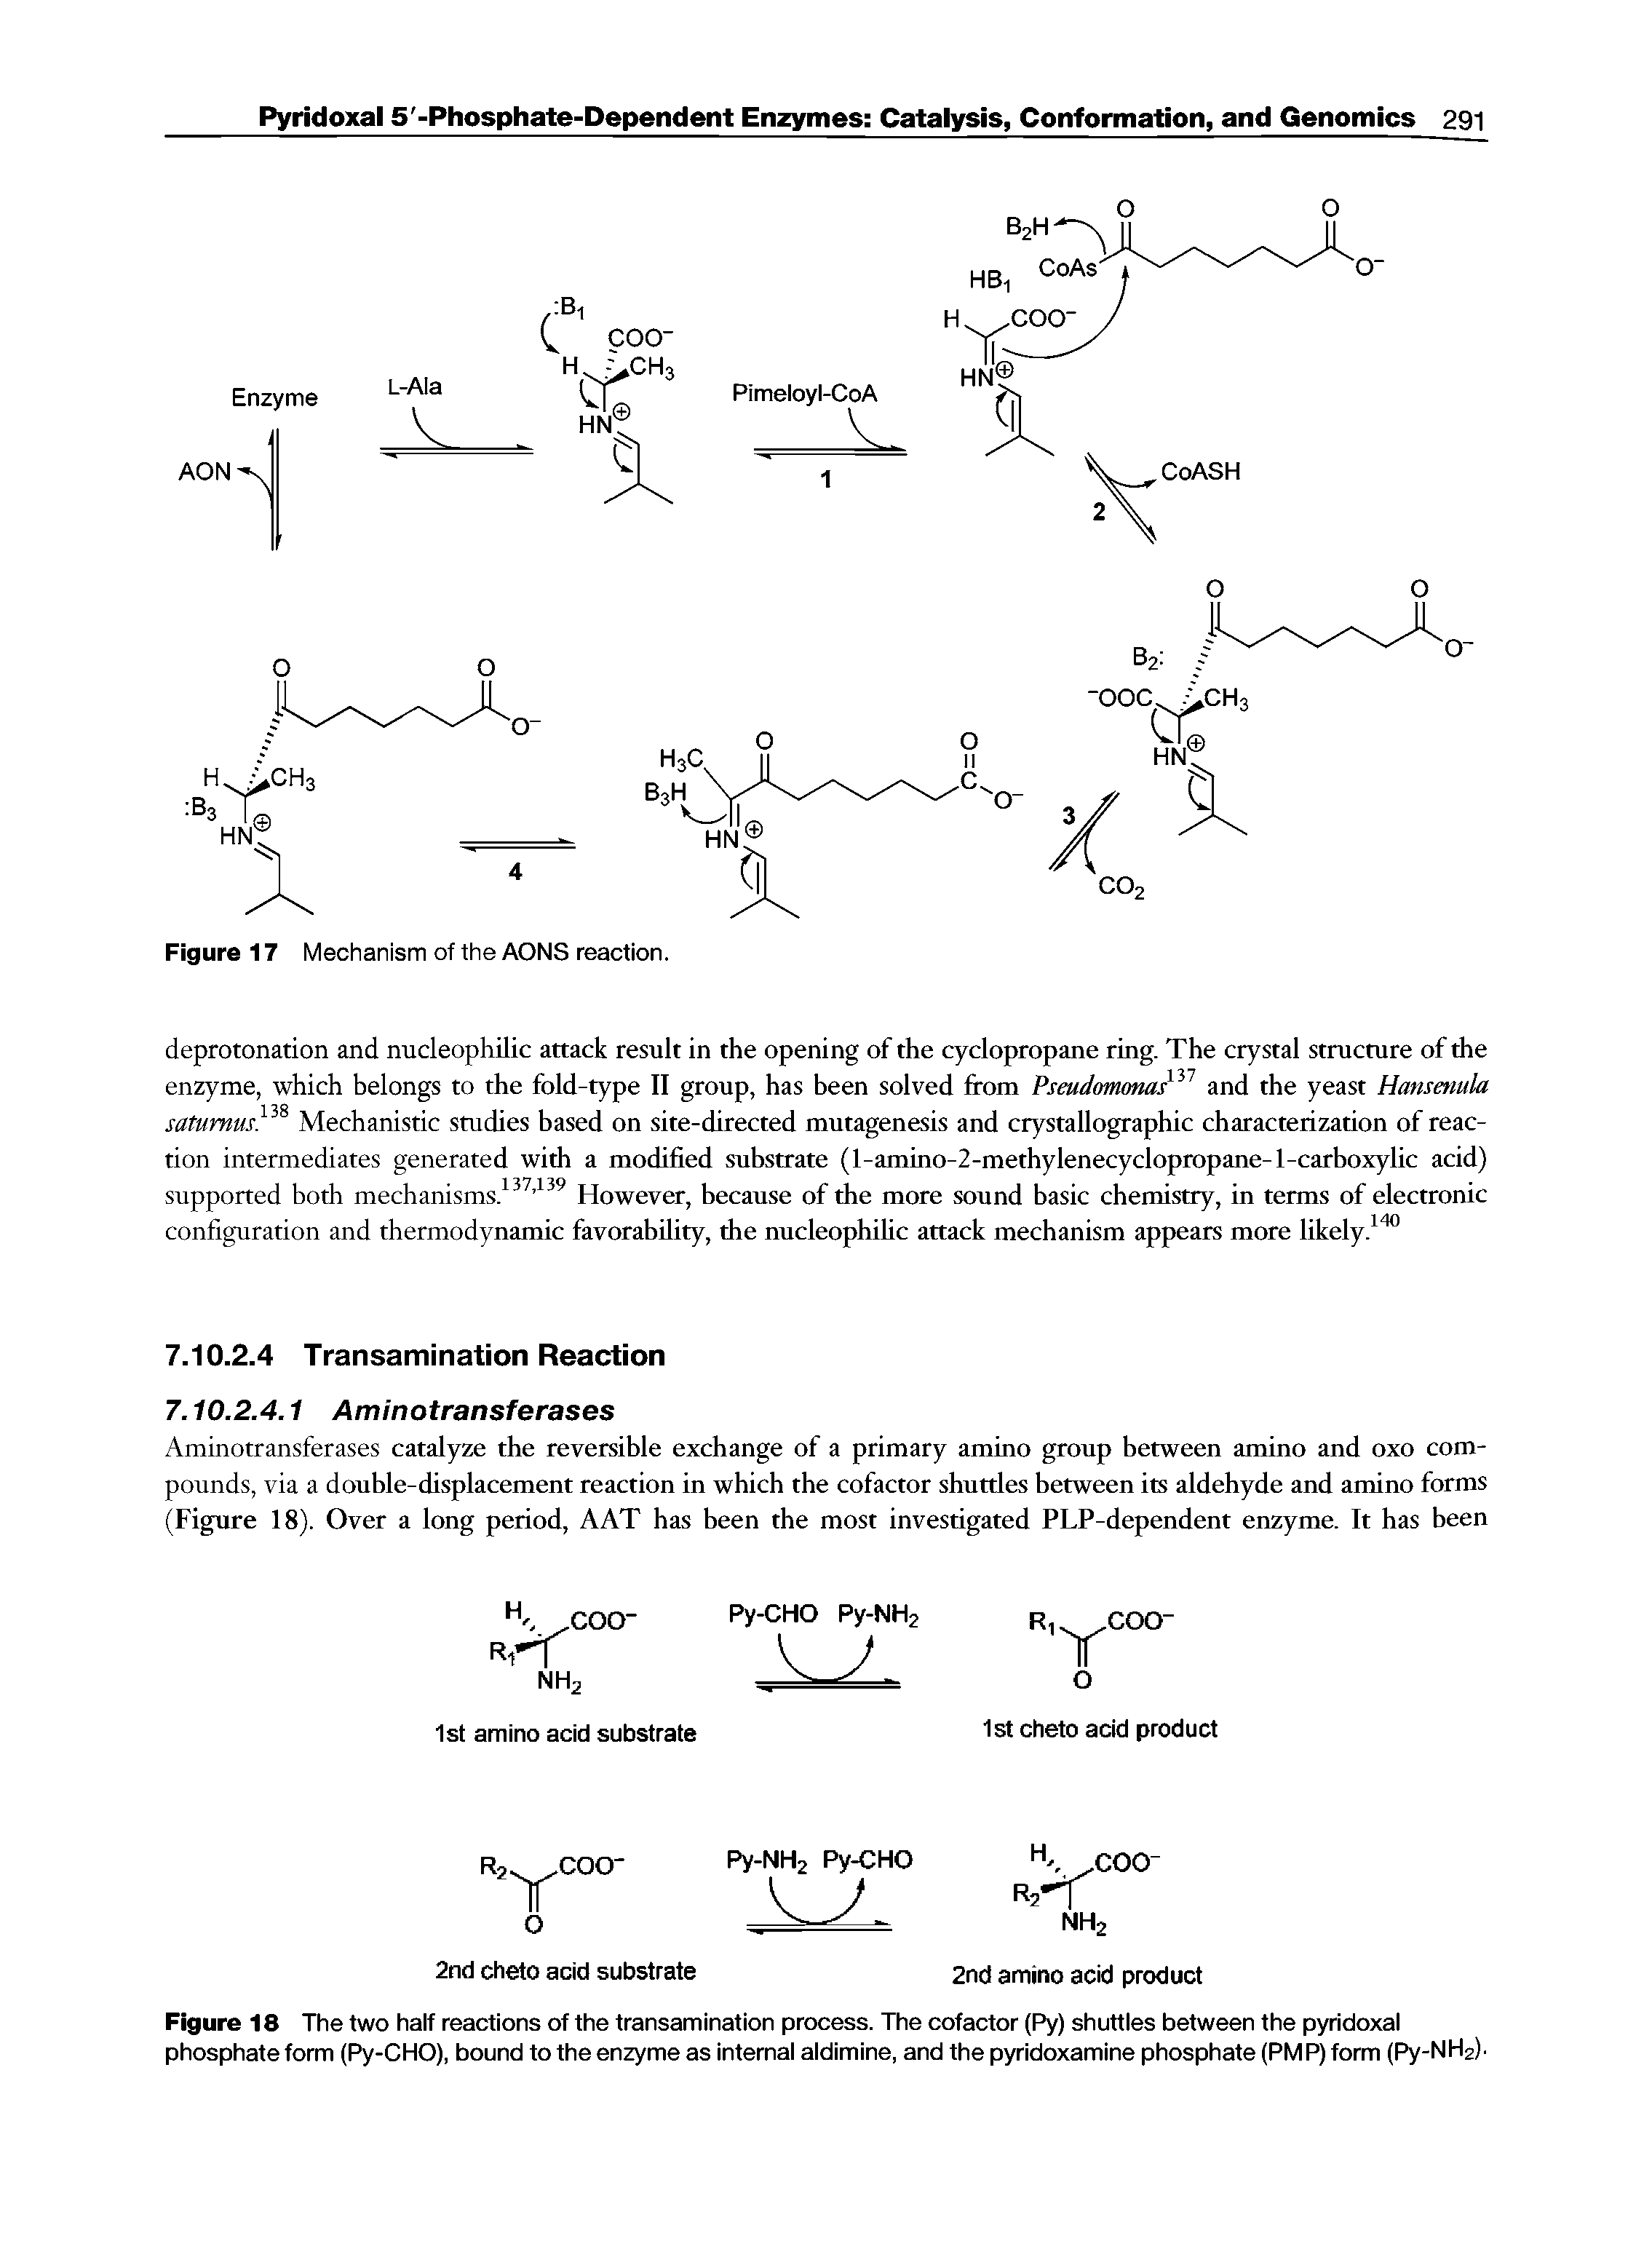 Figure 18 The two haif reactions of the transamination process. The cofactor (Py) shuttles between the pyridoxal phosphate form (Py-CHO), bound to the enzyme as internal aldimine, and the pyridoxamine phosphate (PM P) form (Py-NHz) ...